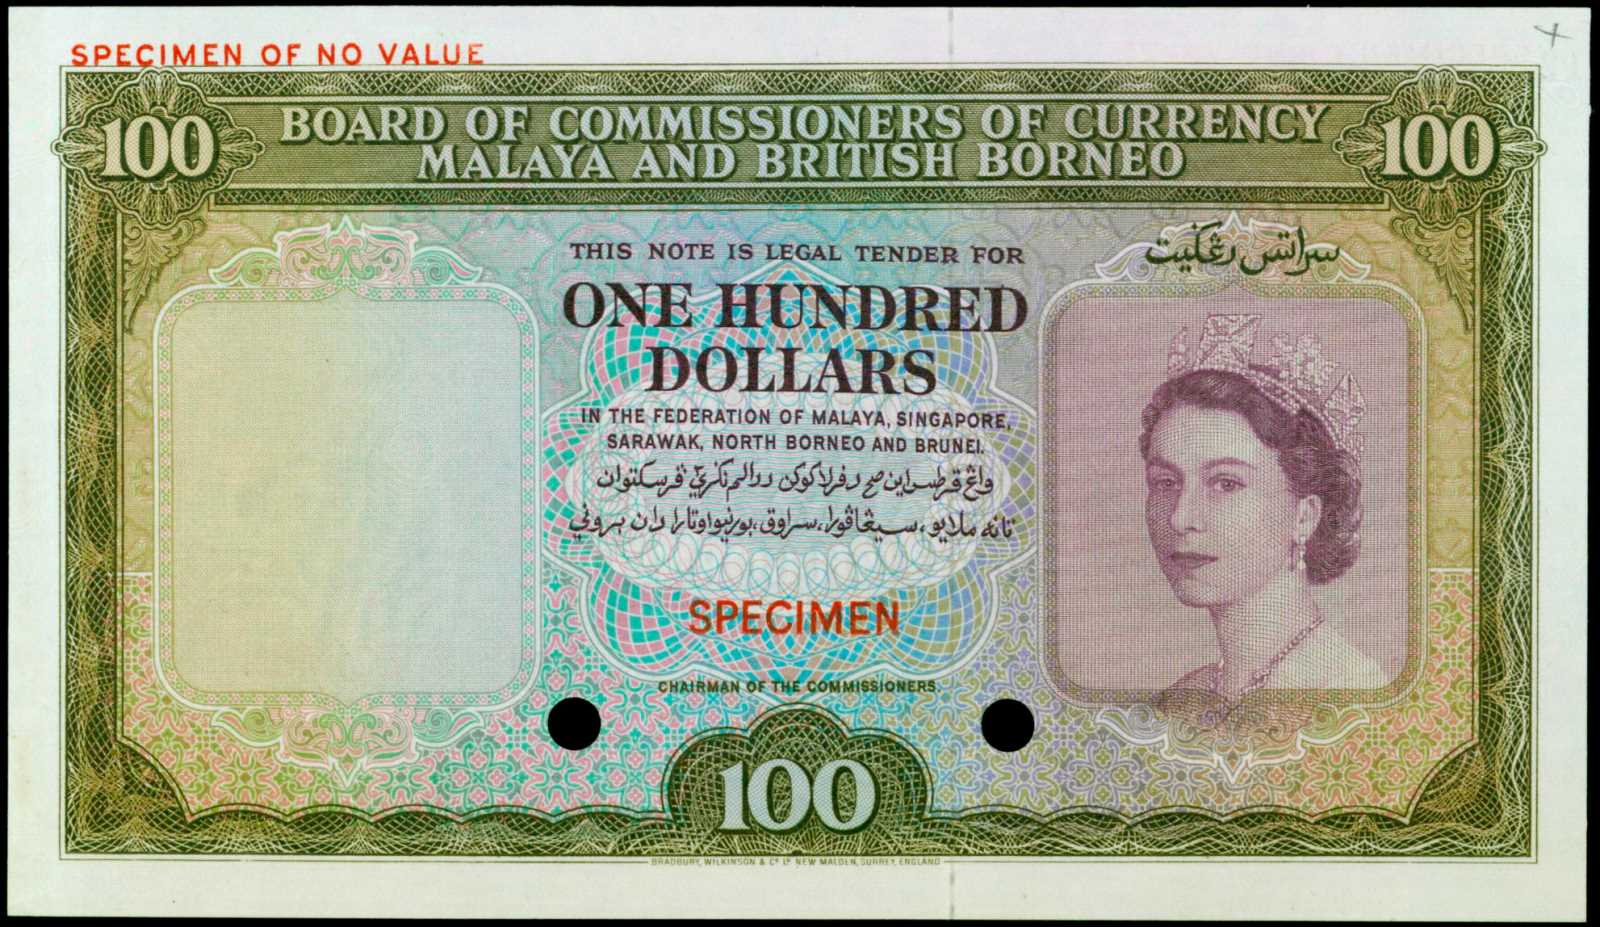 MALAYA AND BRITISH BORNEO. Board of Commissioners of Currency. 100 Dollars